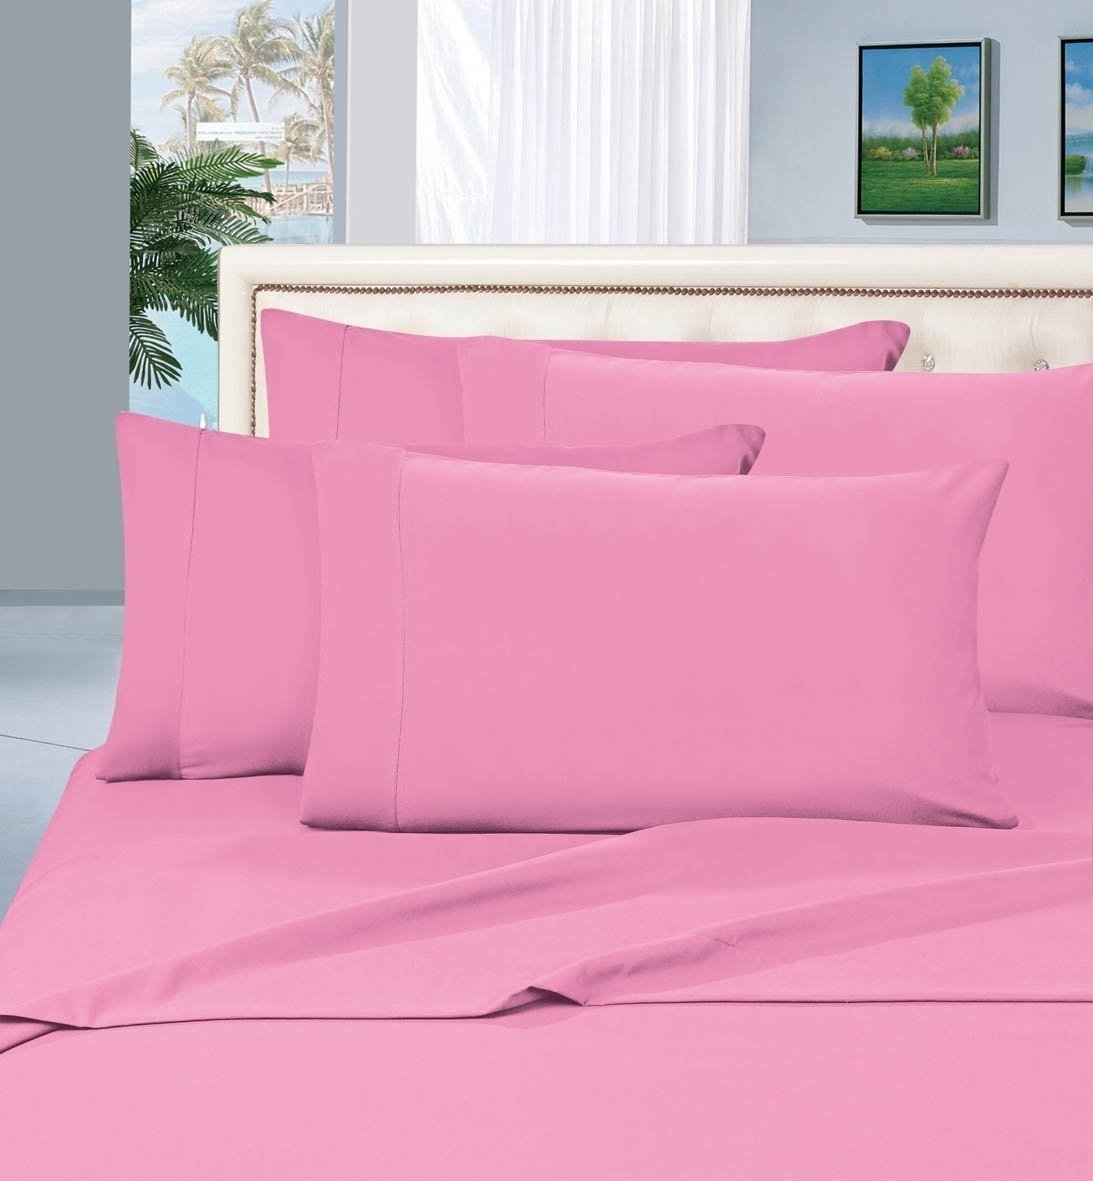 Elegant Comfort 1500 Series Wrinkle Resistant Egyptian Quality Hypoallergenic Ultra Soft Luxury 3-piece Bed Sheet Set, Twin, Light Pink